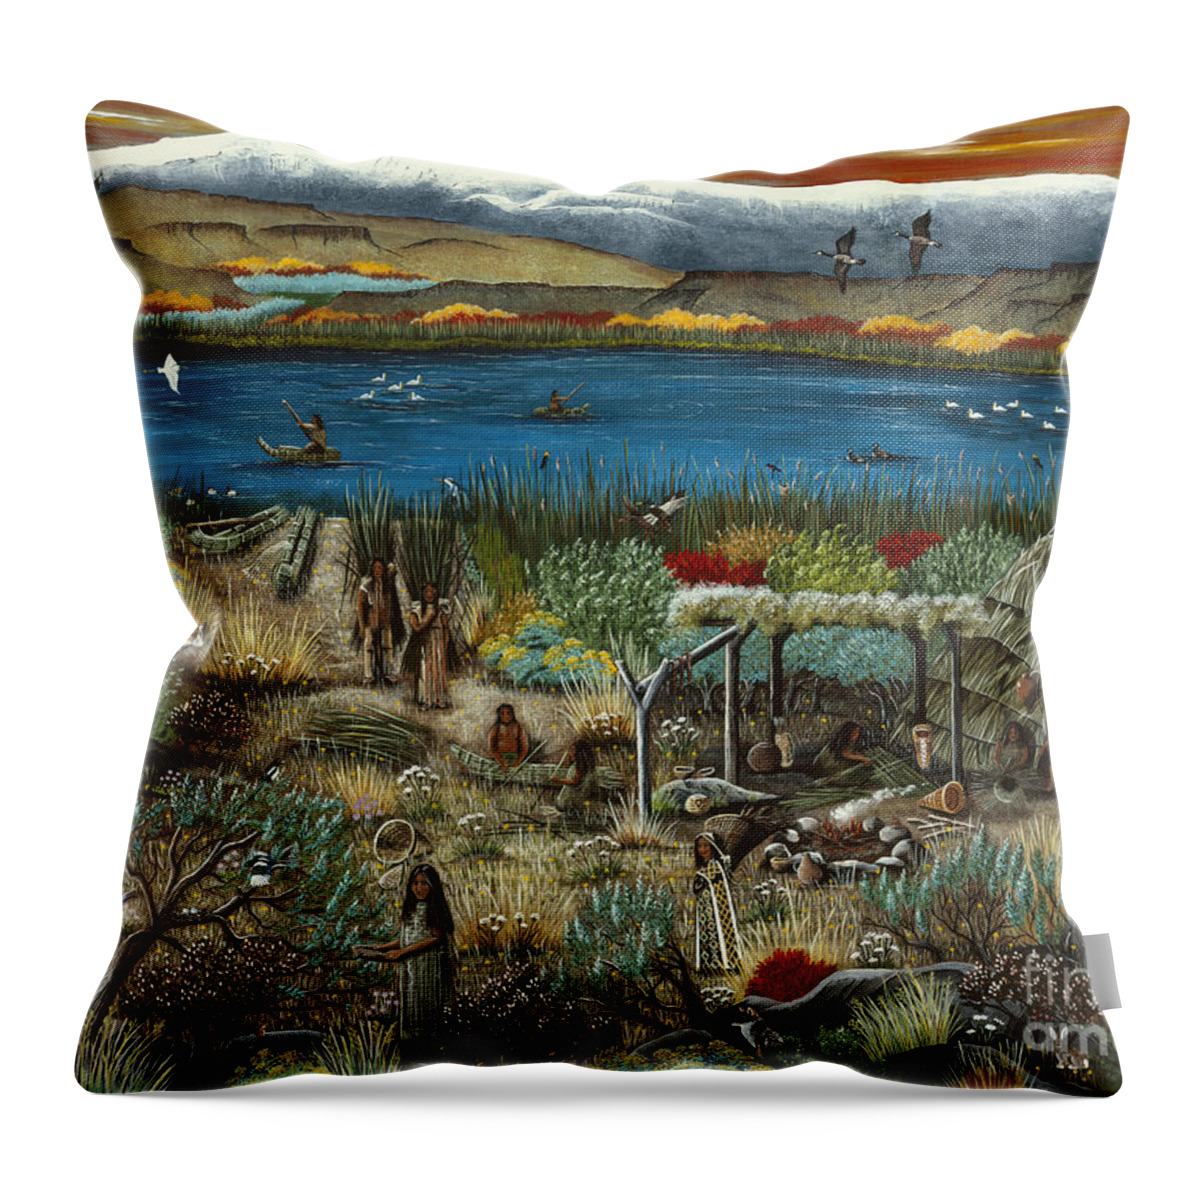 Paiute Throw Pillow featuring the painting The Oregon Paiute by Jennifer Lake